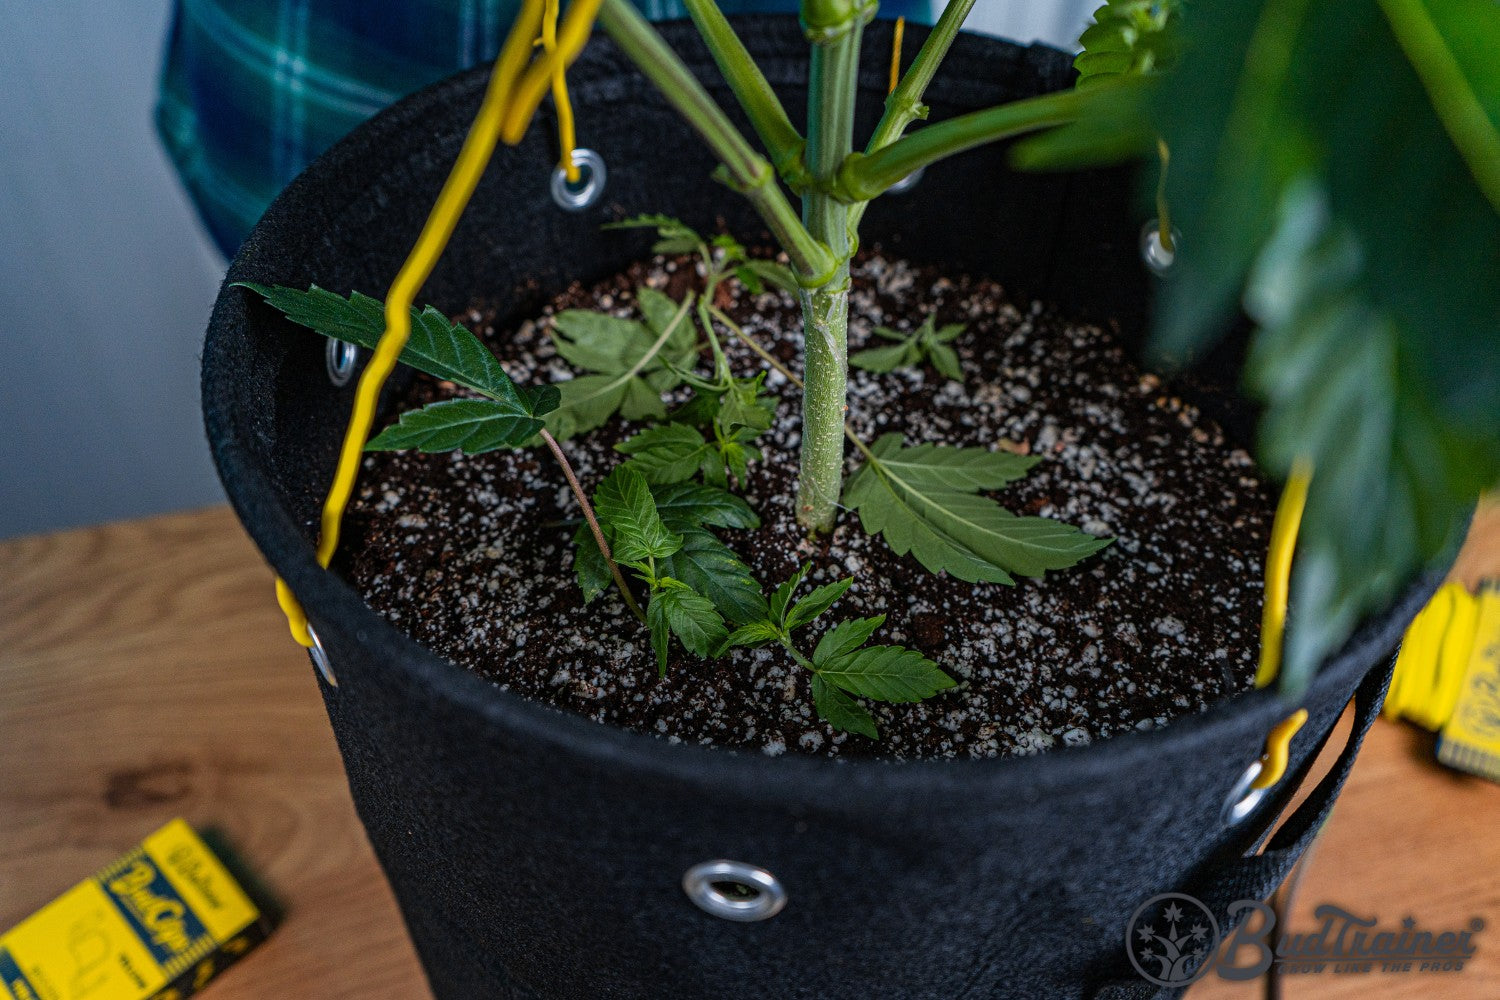 Pruned leaves and branches from a cannabis plant are scattered on the soil surface inside a black fabric grow bag. Yellow plant training wires and the main plant stem are visible, showing the results of trimming small and shaded parts to promote healthier growth. A box of BudTrainer accessories is partially visible on the wooden table next to the grow bag.